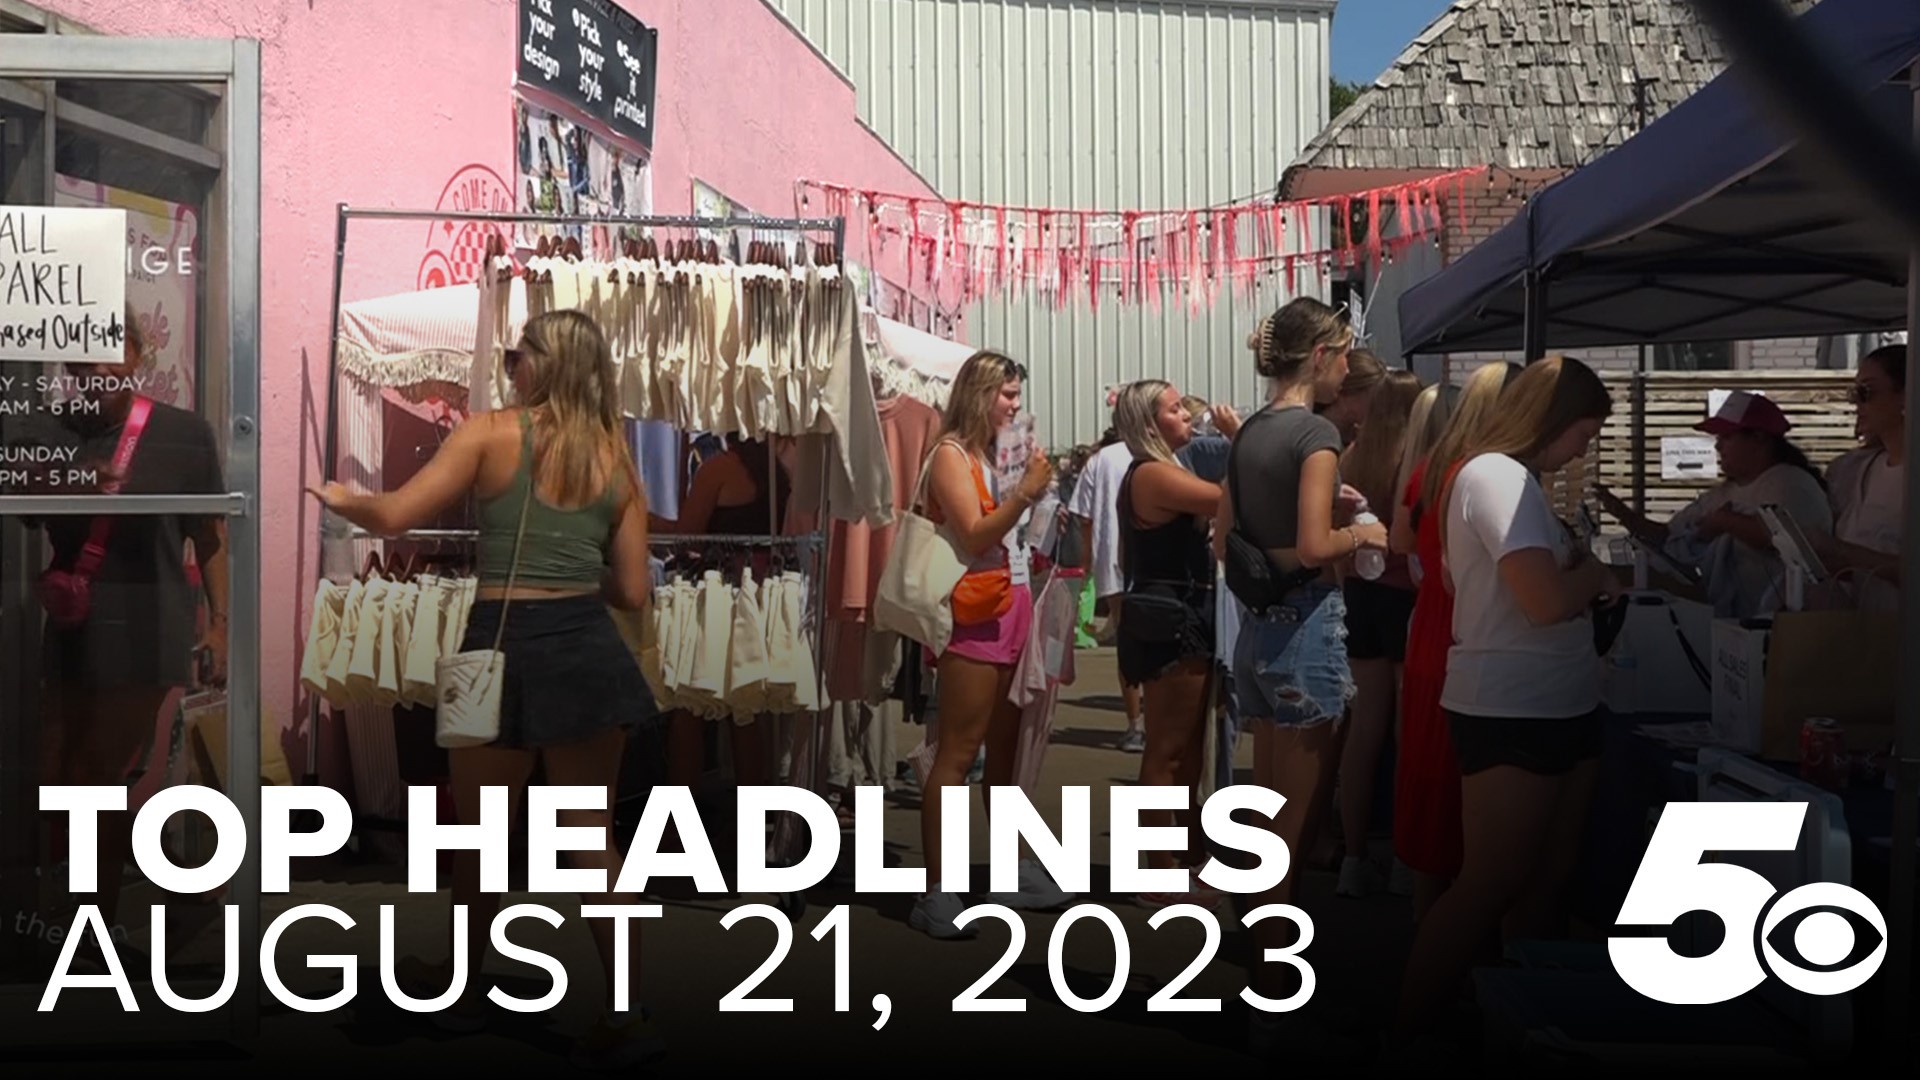 Watch today's top headlines to see what you may have missed!